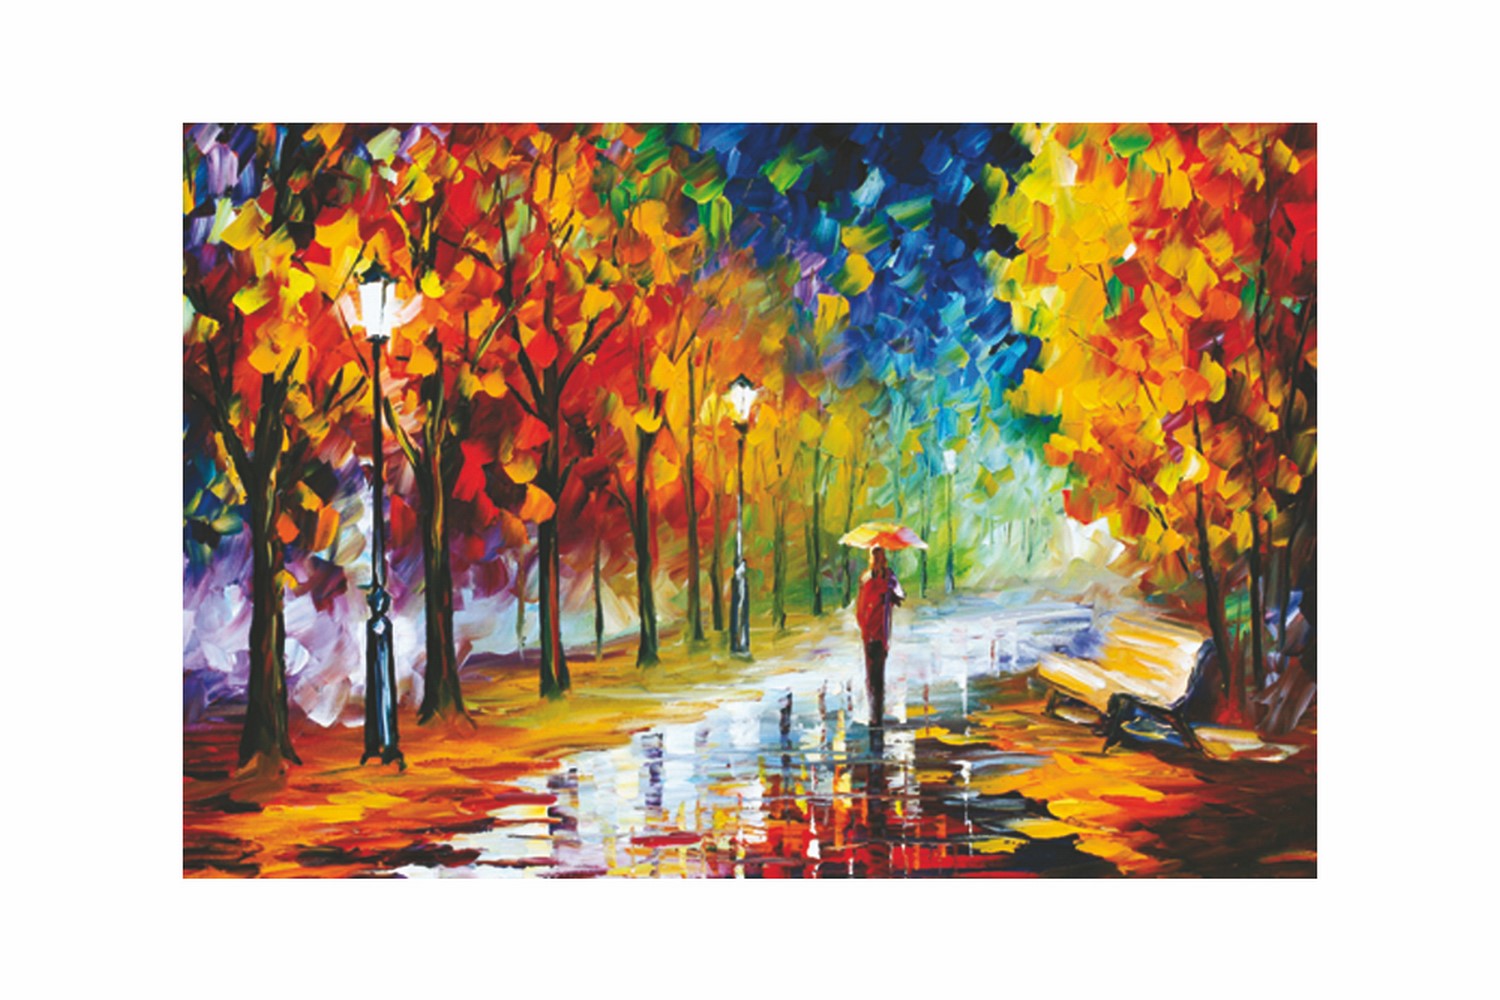 Artistic Rain View Design Self Adhesive Sparkle Coated Painting without frame